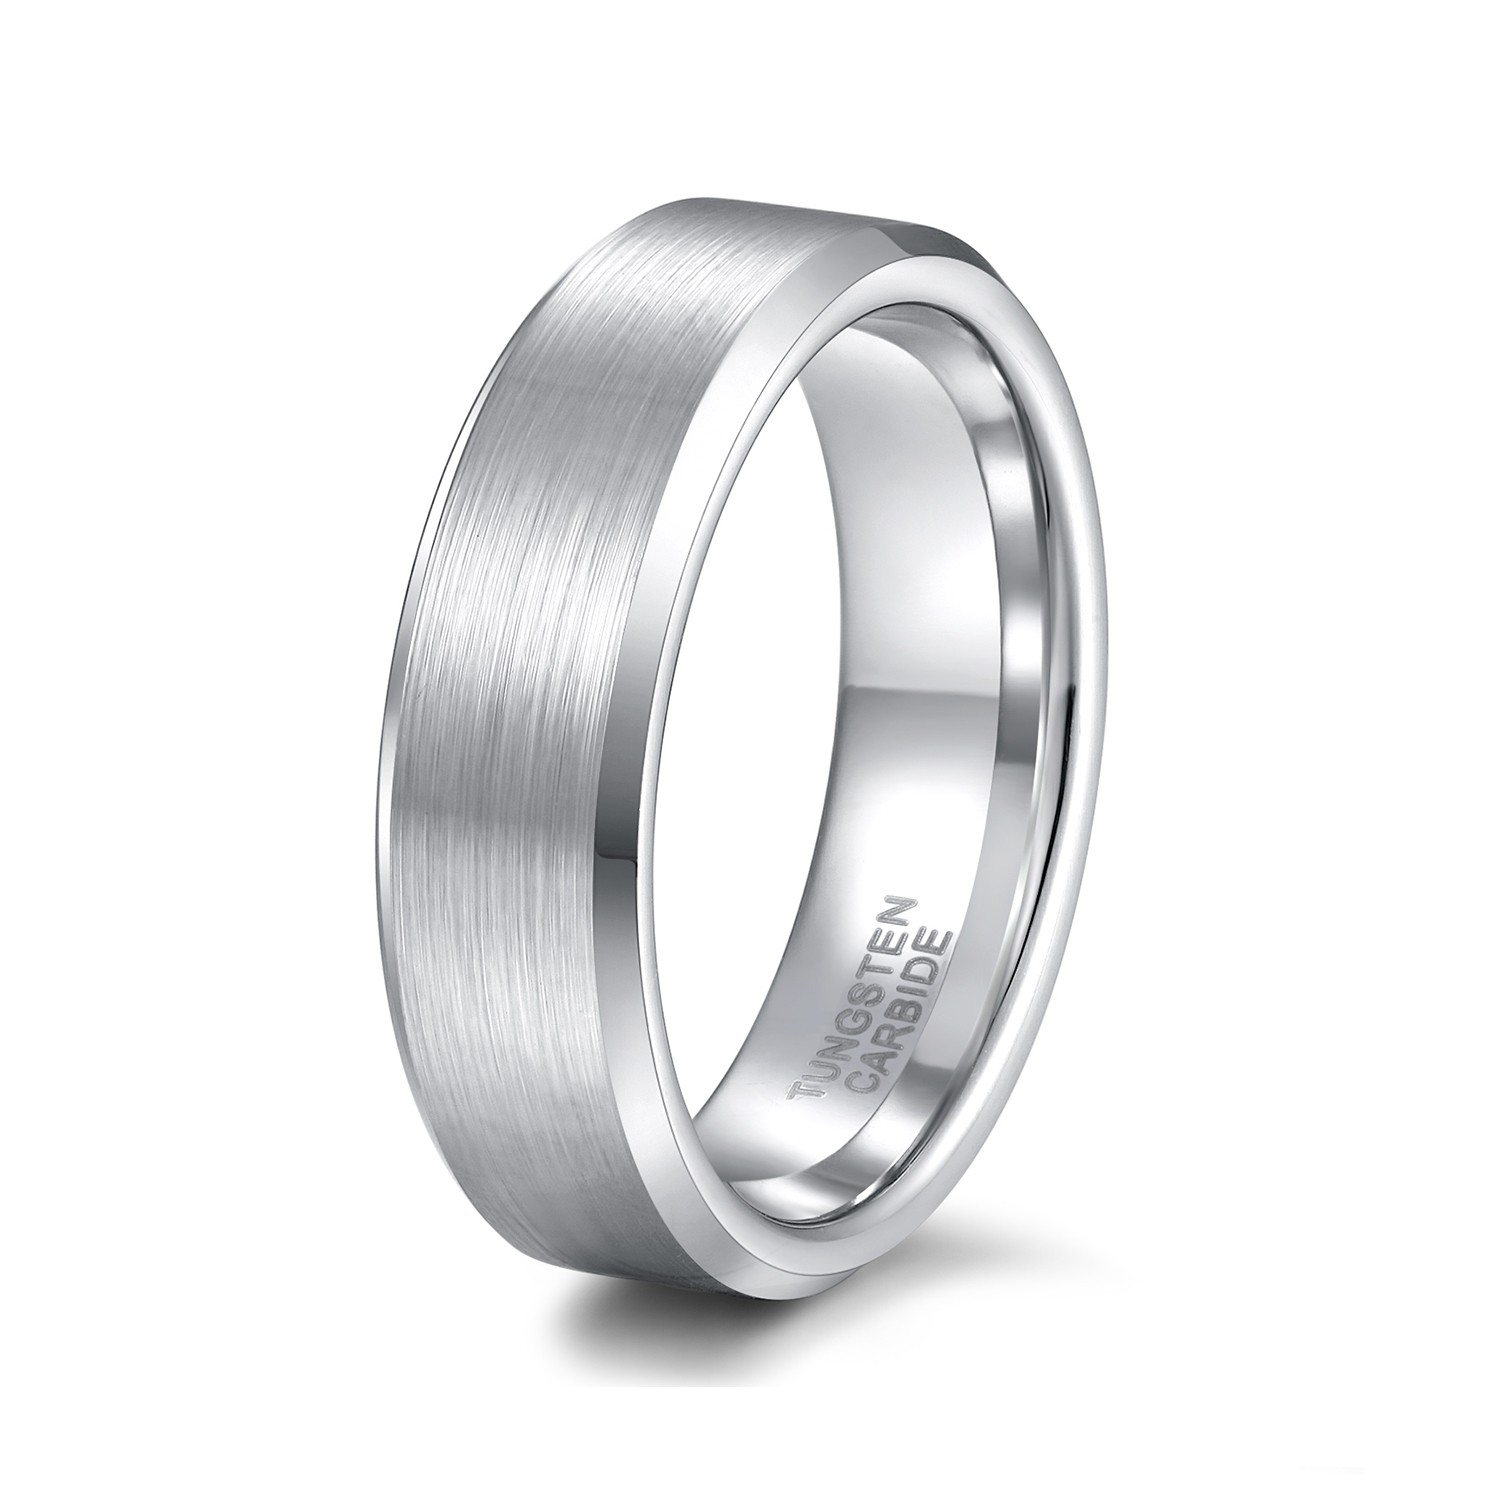 Silver Tungsten Wedding Bands for Men Women Brushed Center and Beveled Edge  - 4mm - 8mm